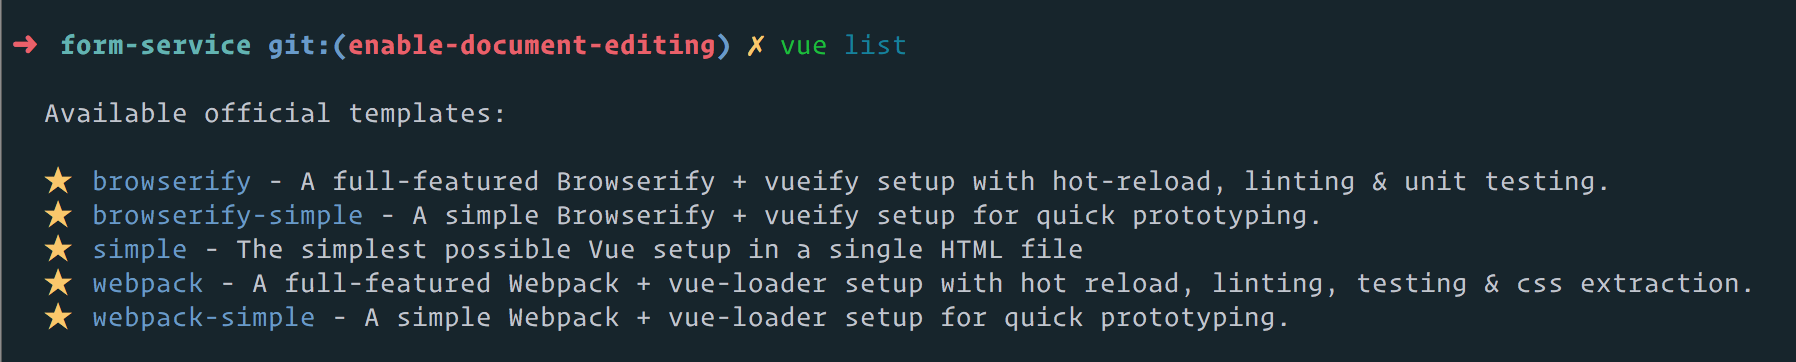 List of official vue-cli application templates